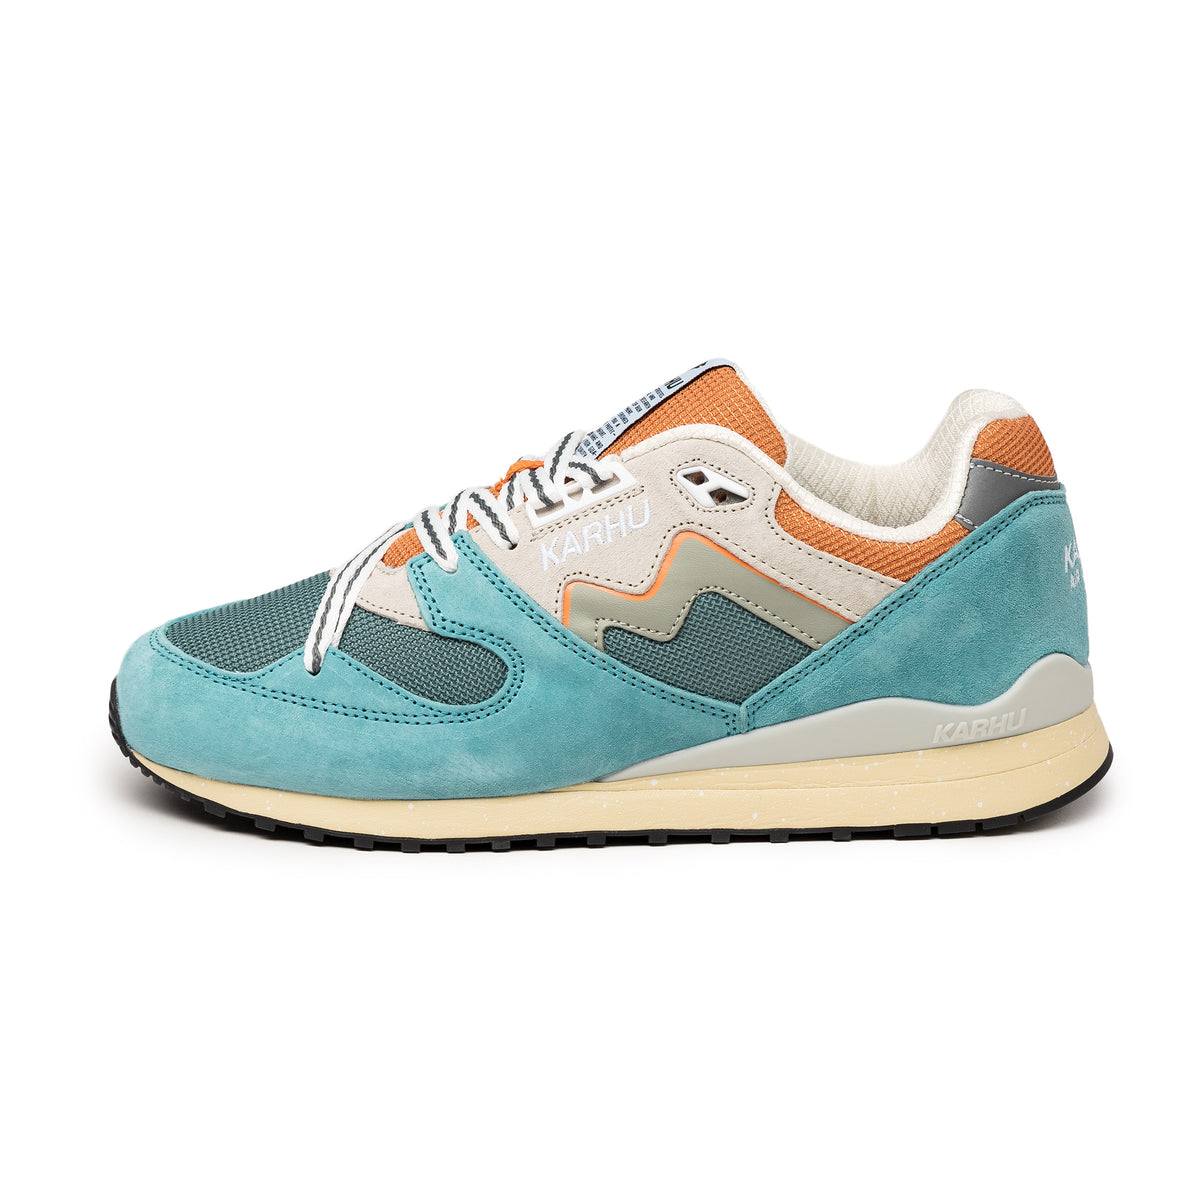 Karhu Synchron Classic – buy now at Asphaltgold Online Store!